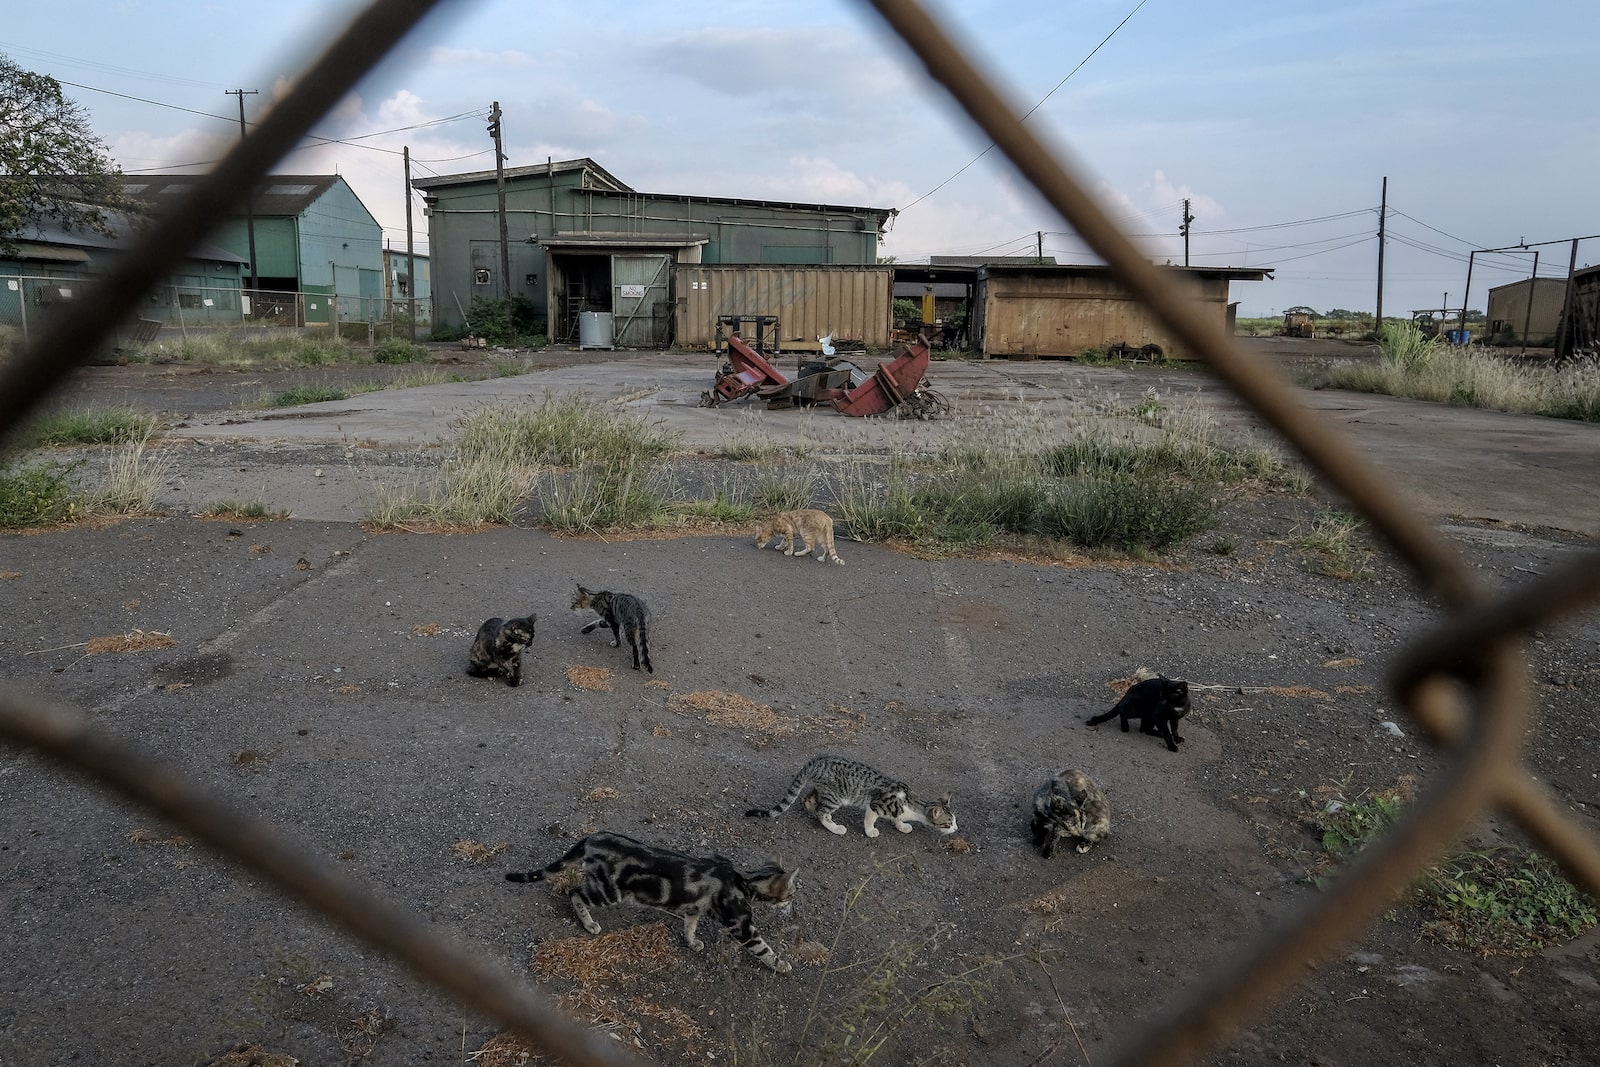 cats sit on the grounds of an old factor, as seen through a chain-link fence